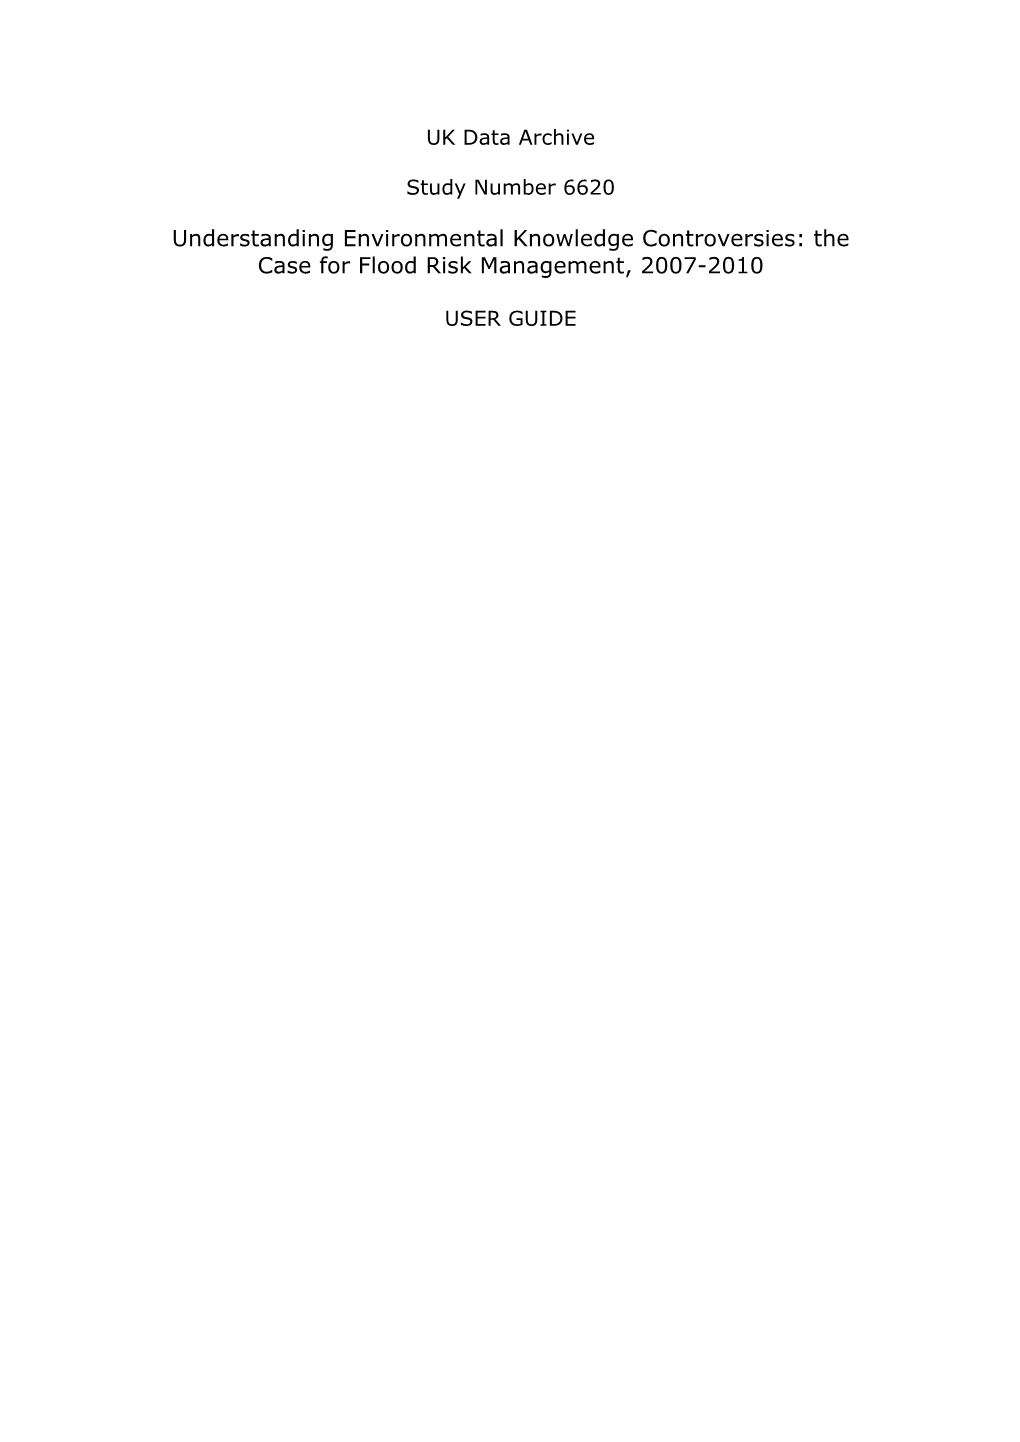 Understanding Environmental Knowledge Controversies: the Case for Flood Risk Management, 2007-2010